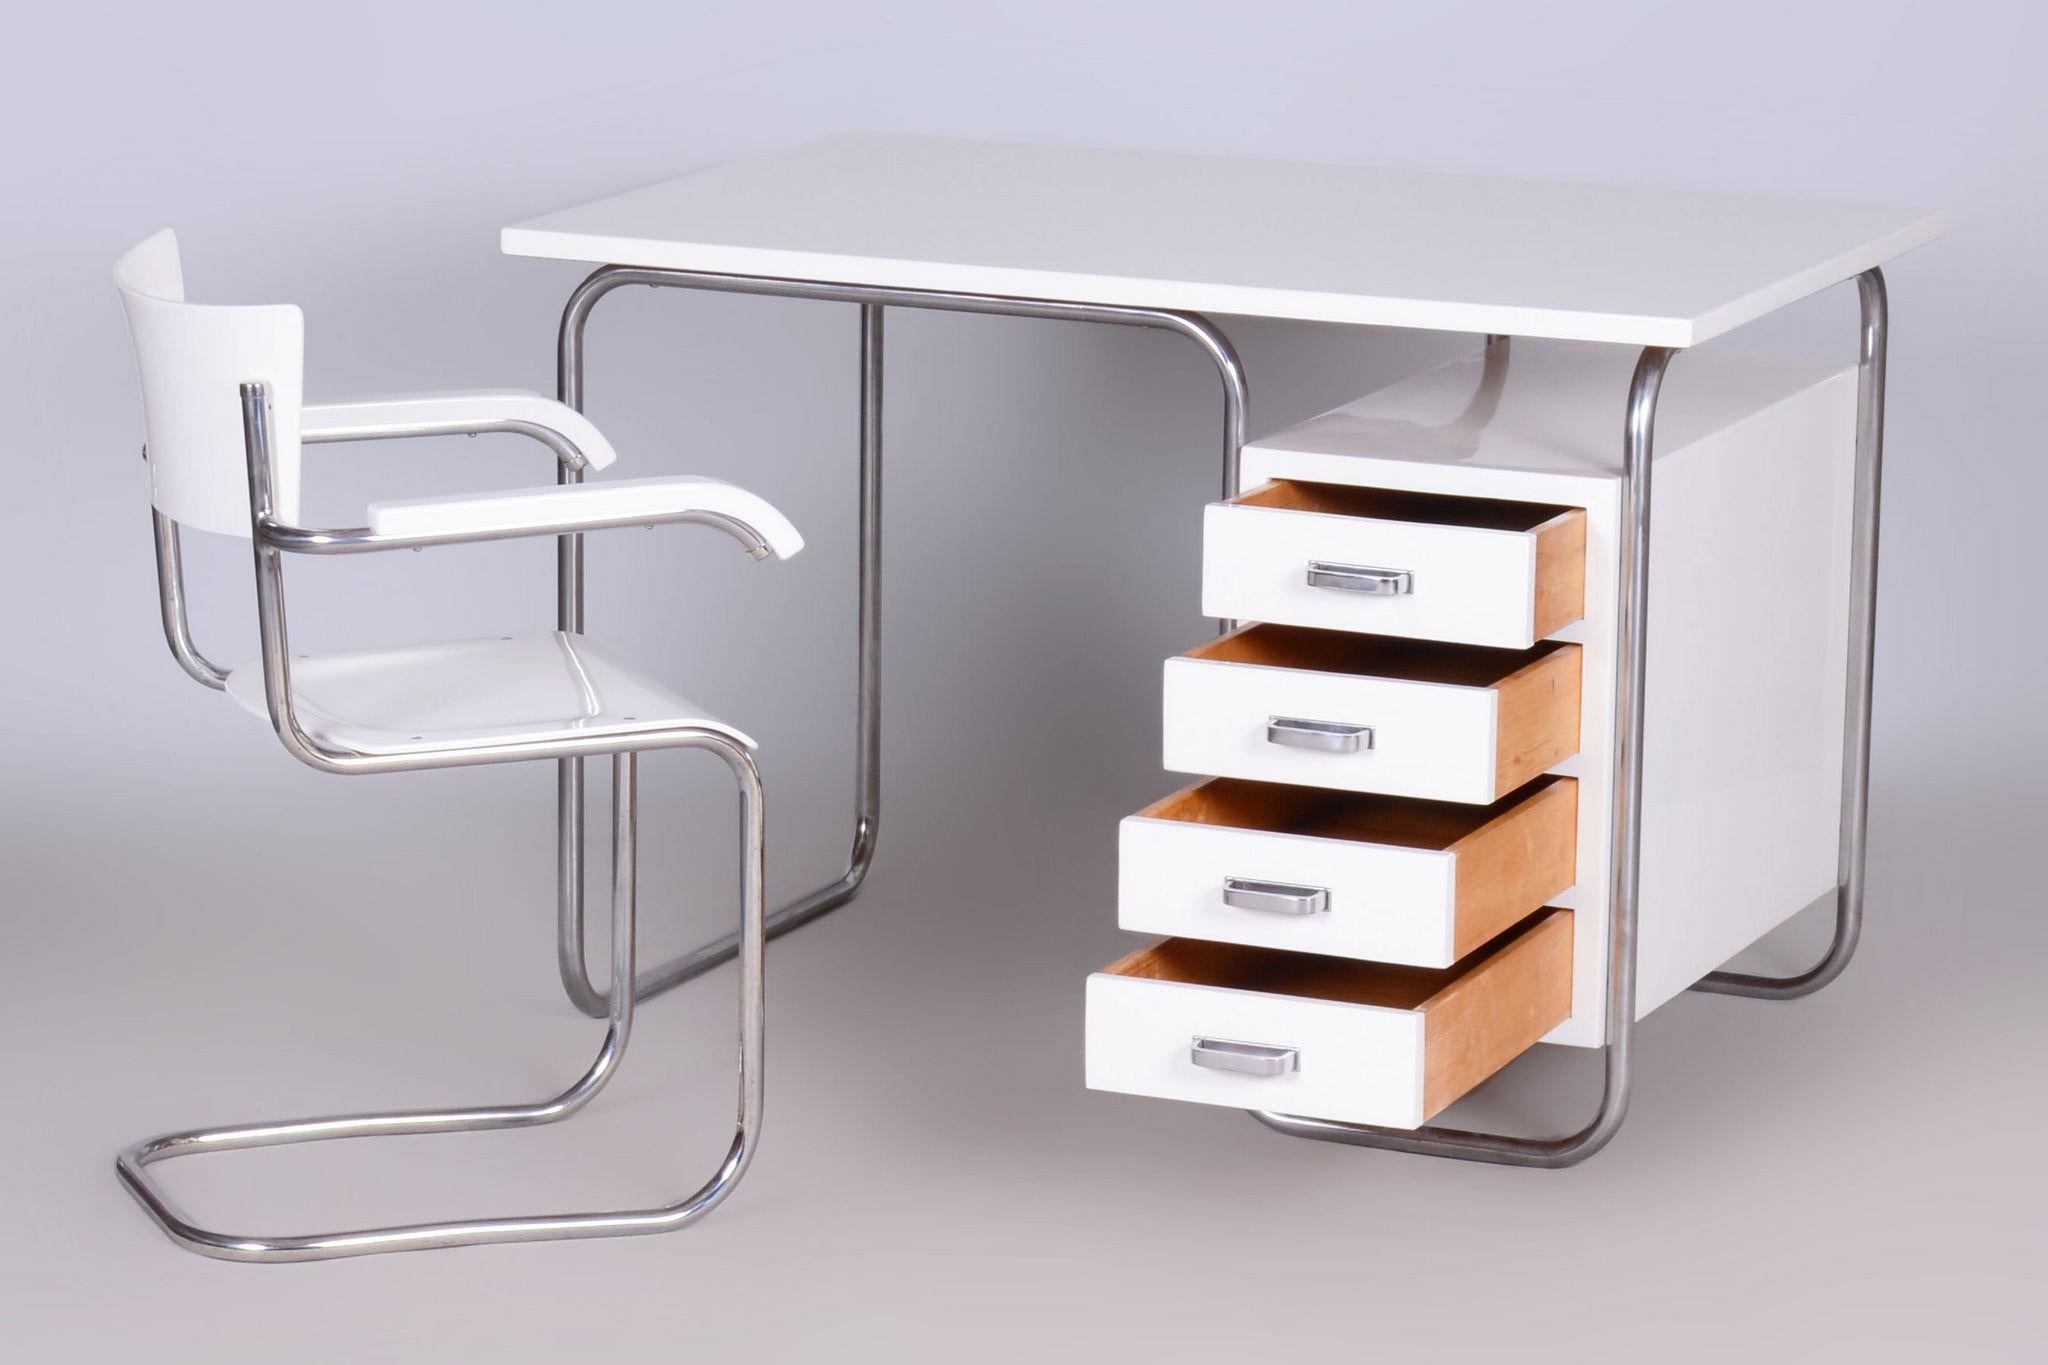 Restored Bauhaus Writing Desk With Chair, Chrome, Steel, Wood, Czech, 1930s For Sale 3